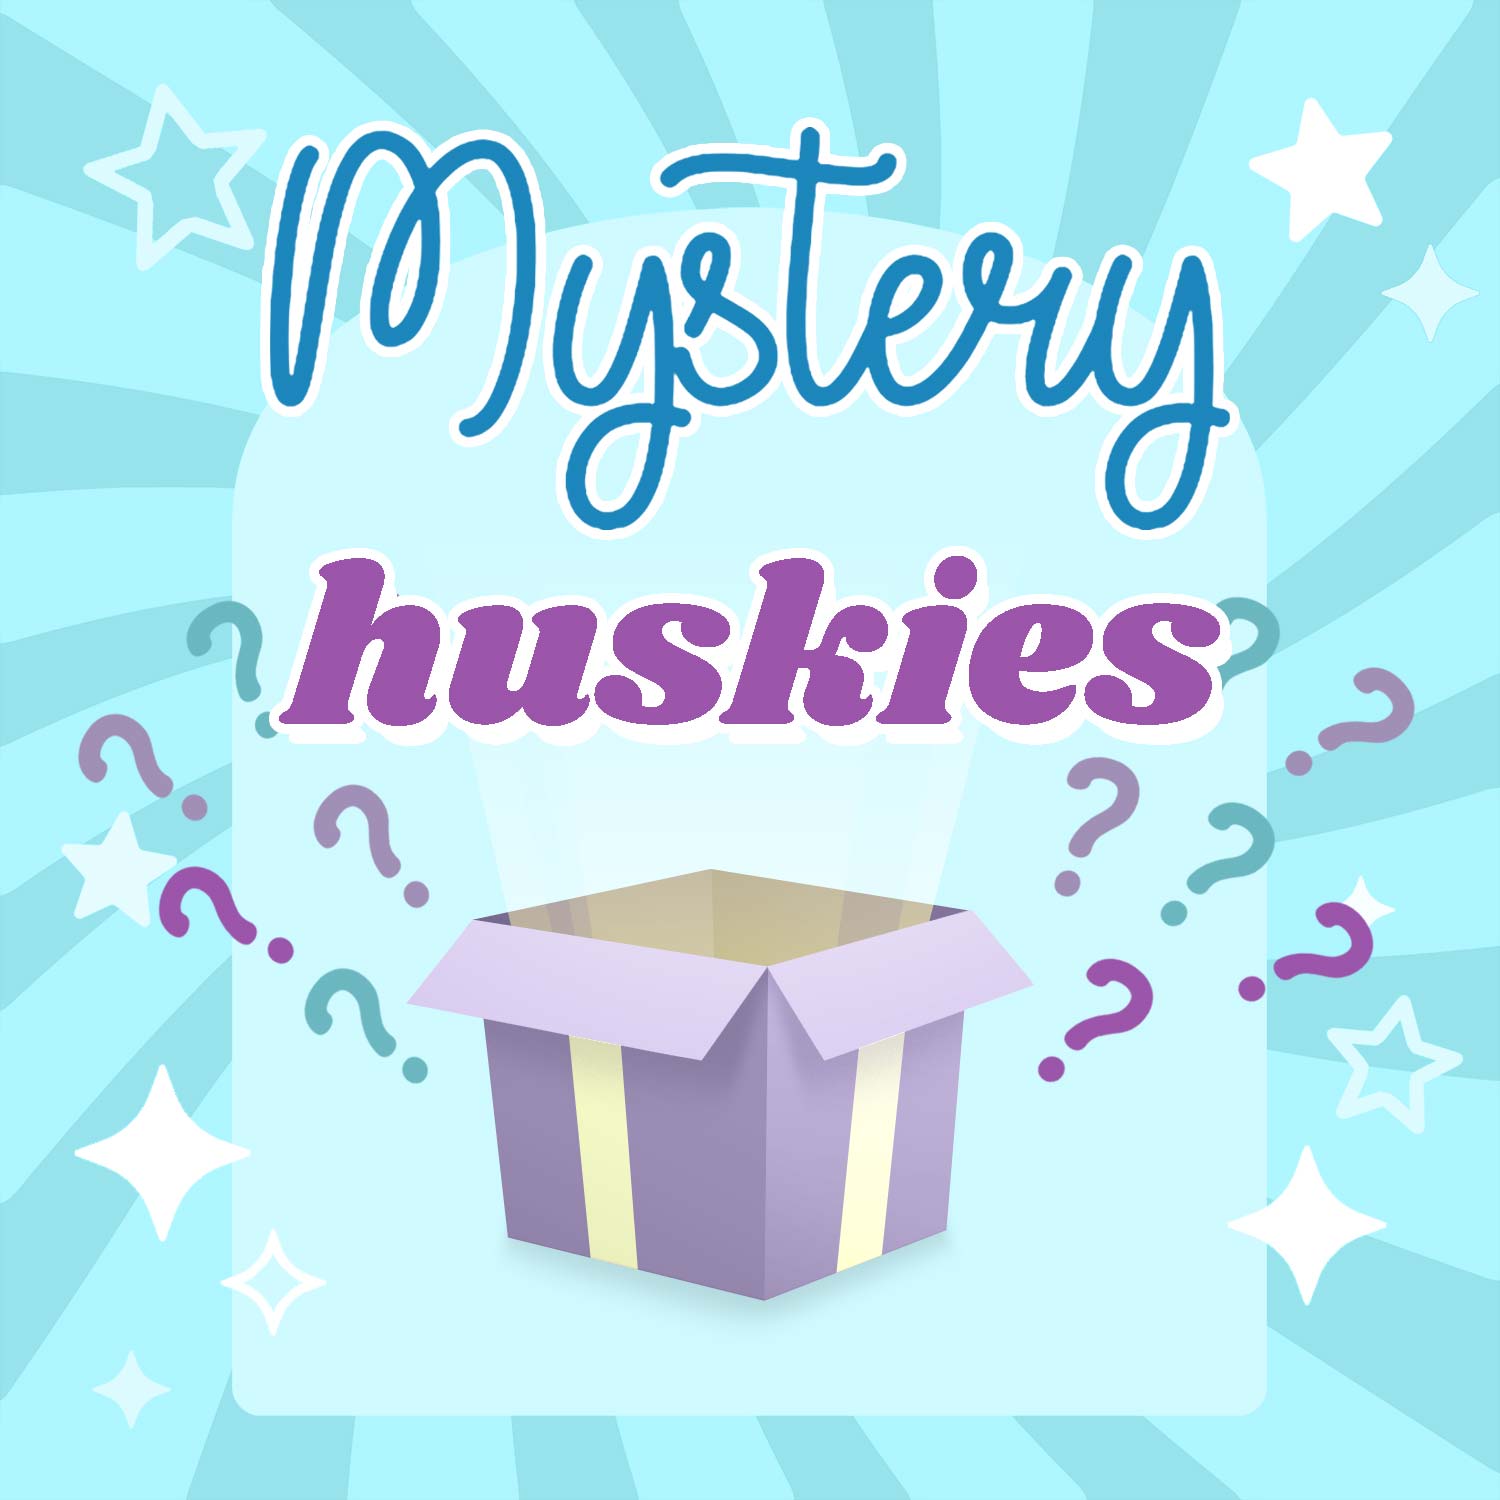 Mystery Husky 3-Pack Brooches & Lapel Pins Flair Fighter   